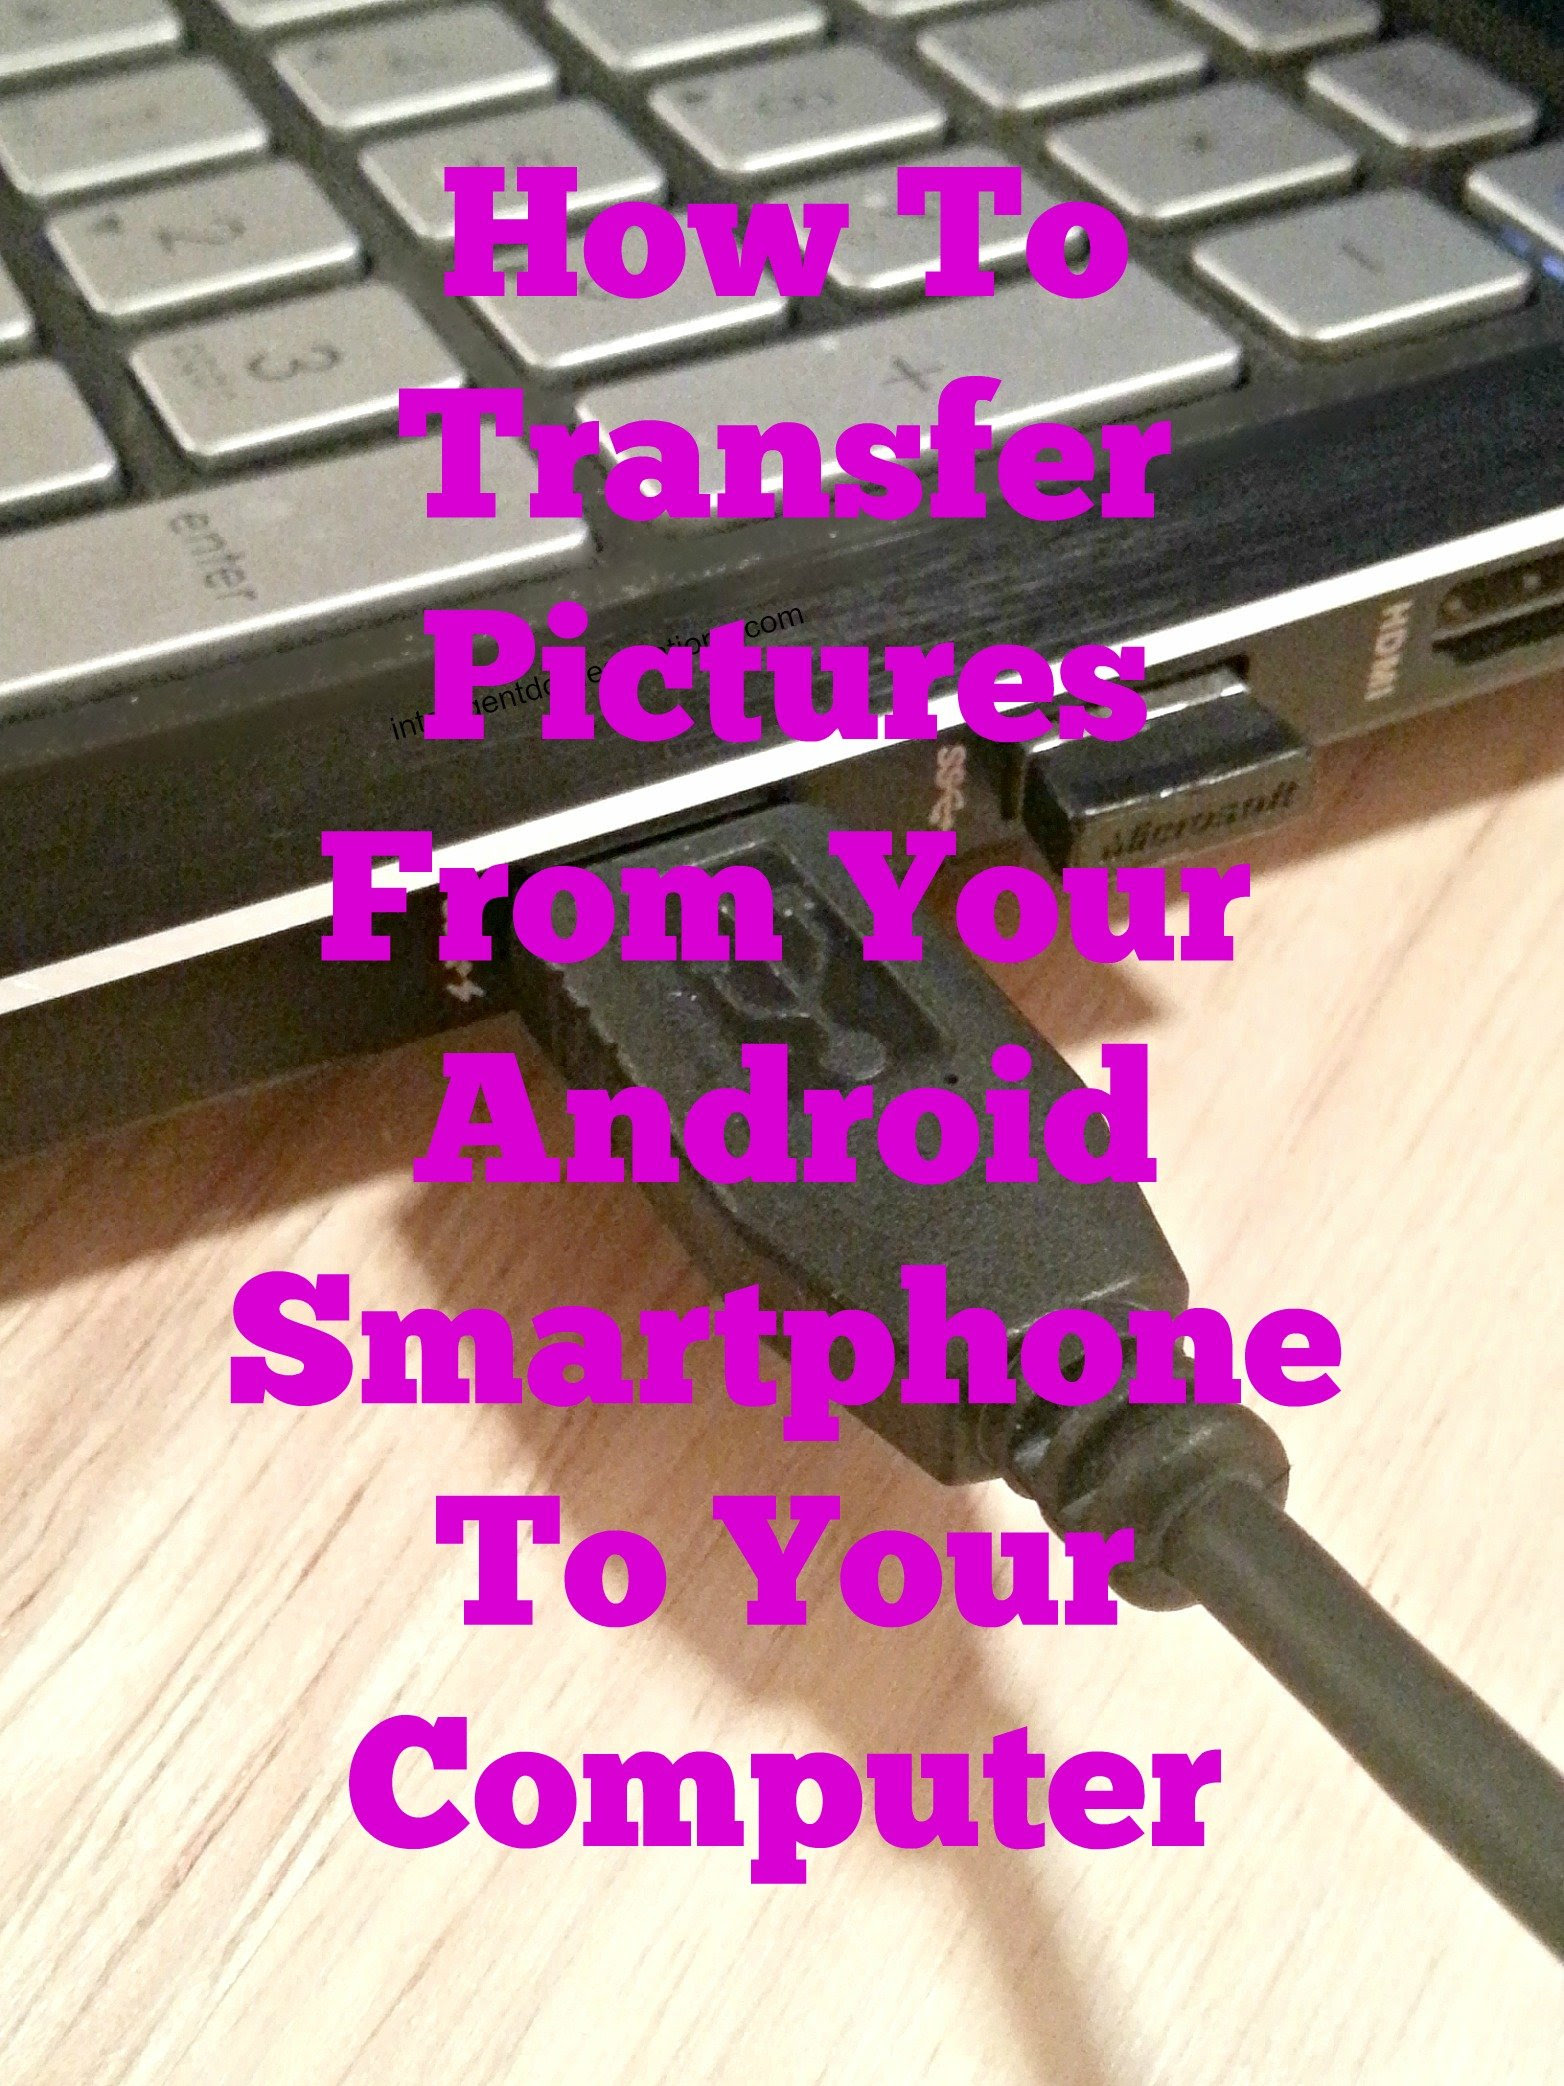 How To Transfer Pictures From Your Android Phone To Your ...